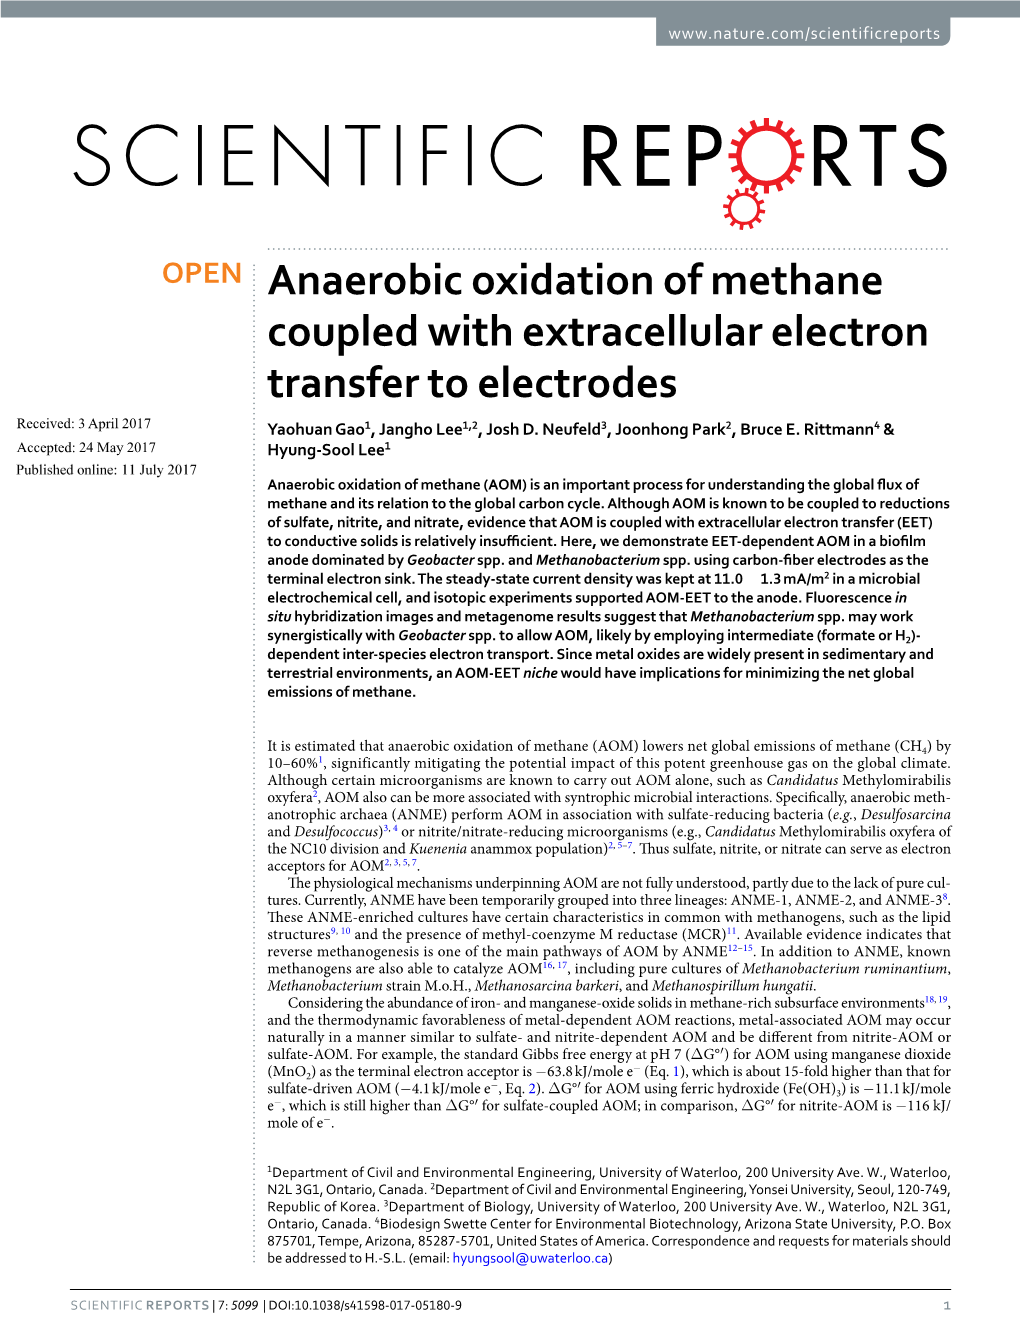 Anaerobic Oxidation of Methane Coupled with Extracellular Electron Transfer to Electrodes Received: 3 April 2017 Yaohuan Gao1, Jangho Lee1,2, Josh D